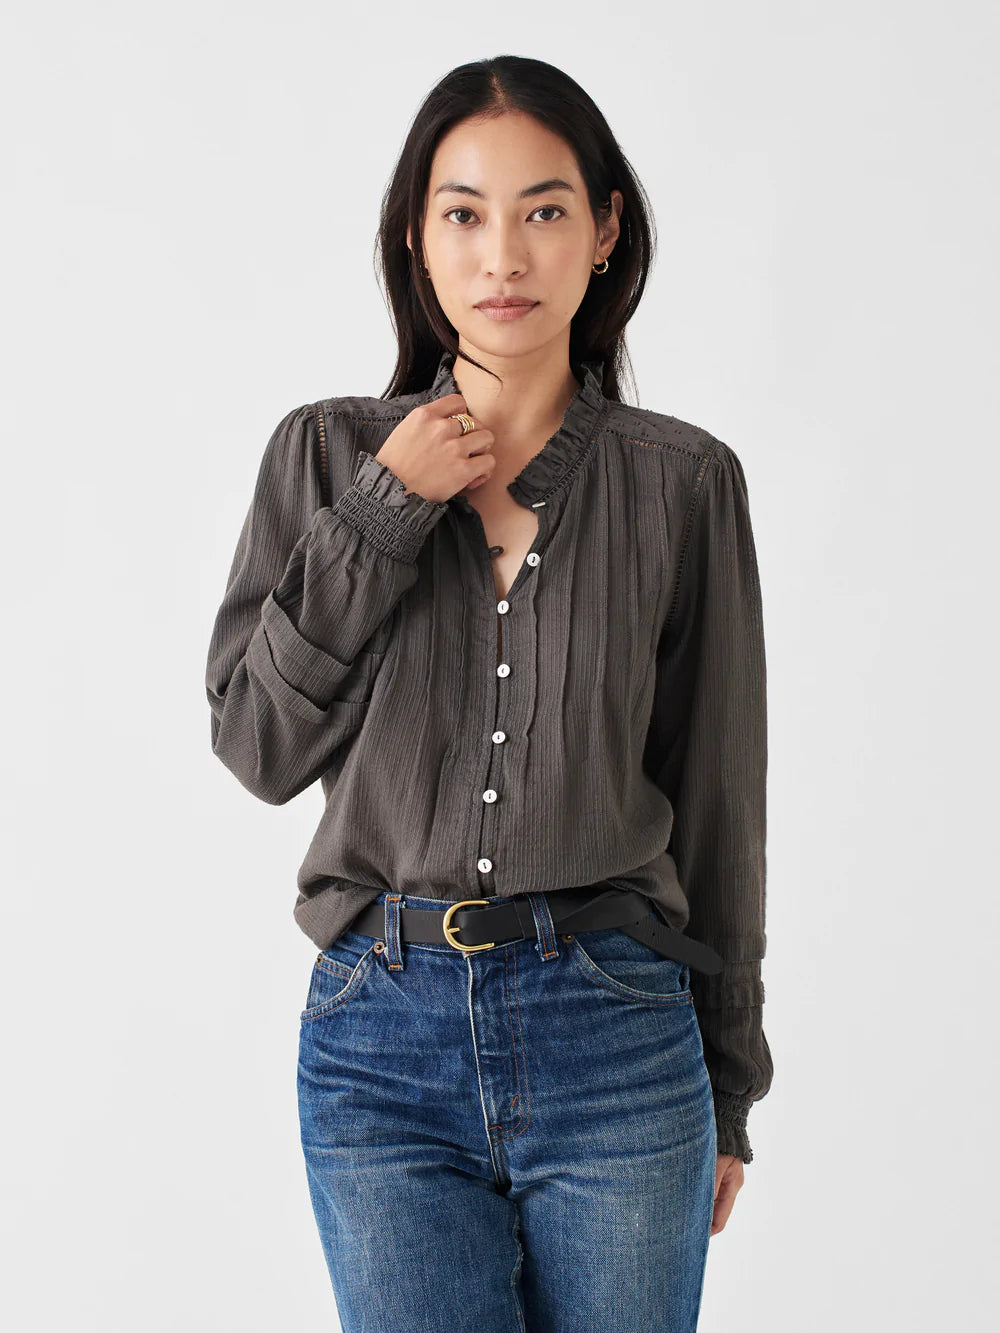 Faherty Womens Willa Top in Faded Black